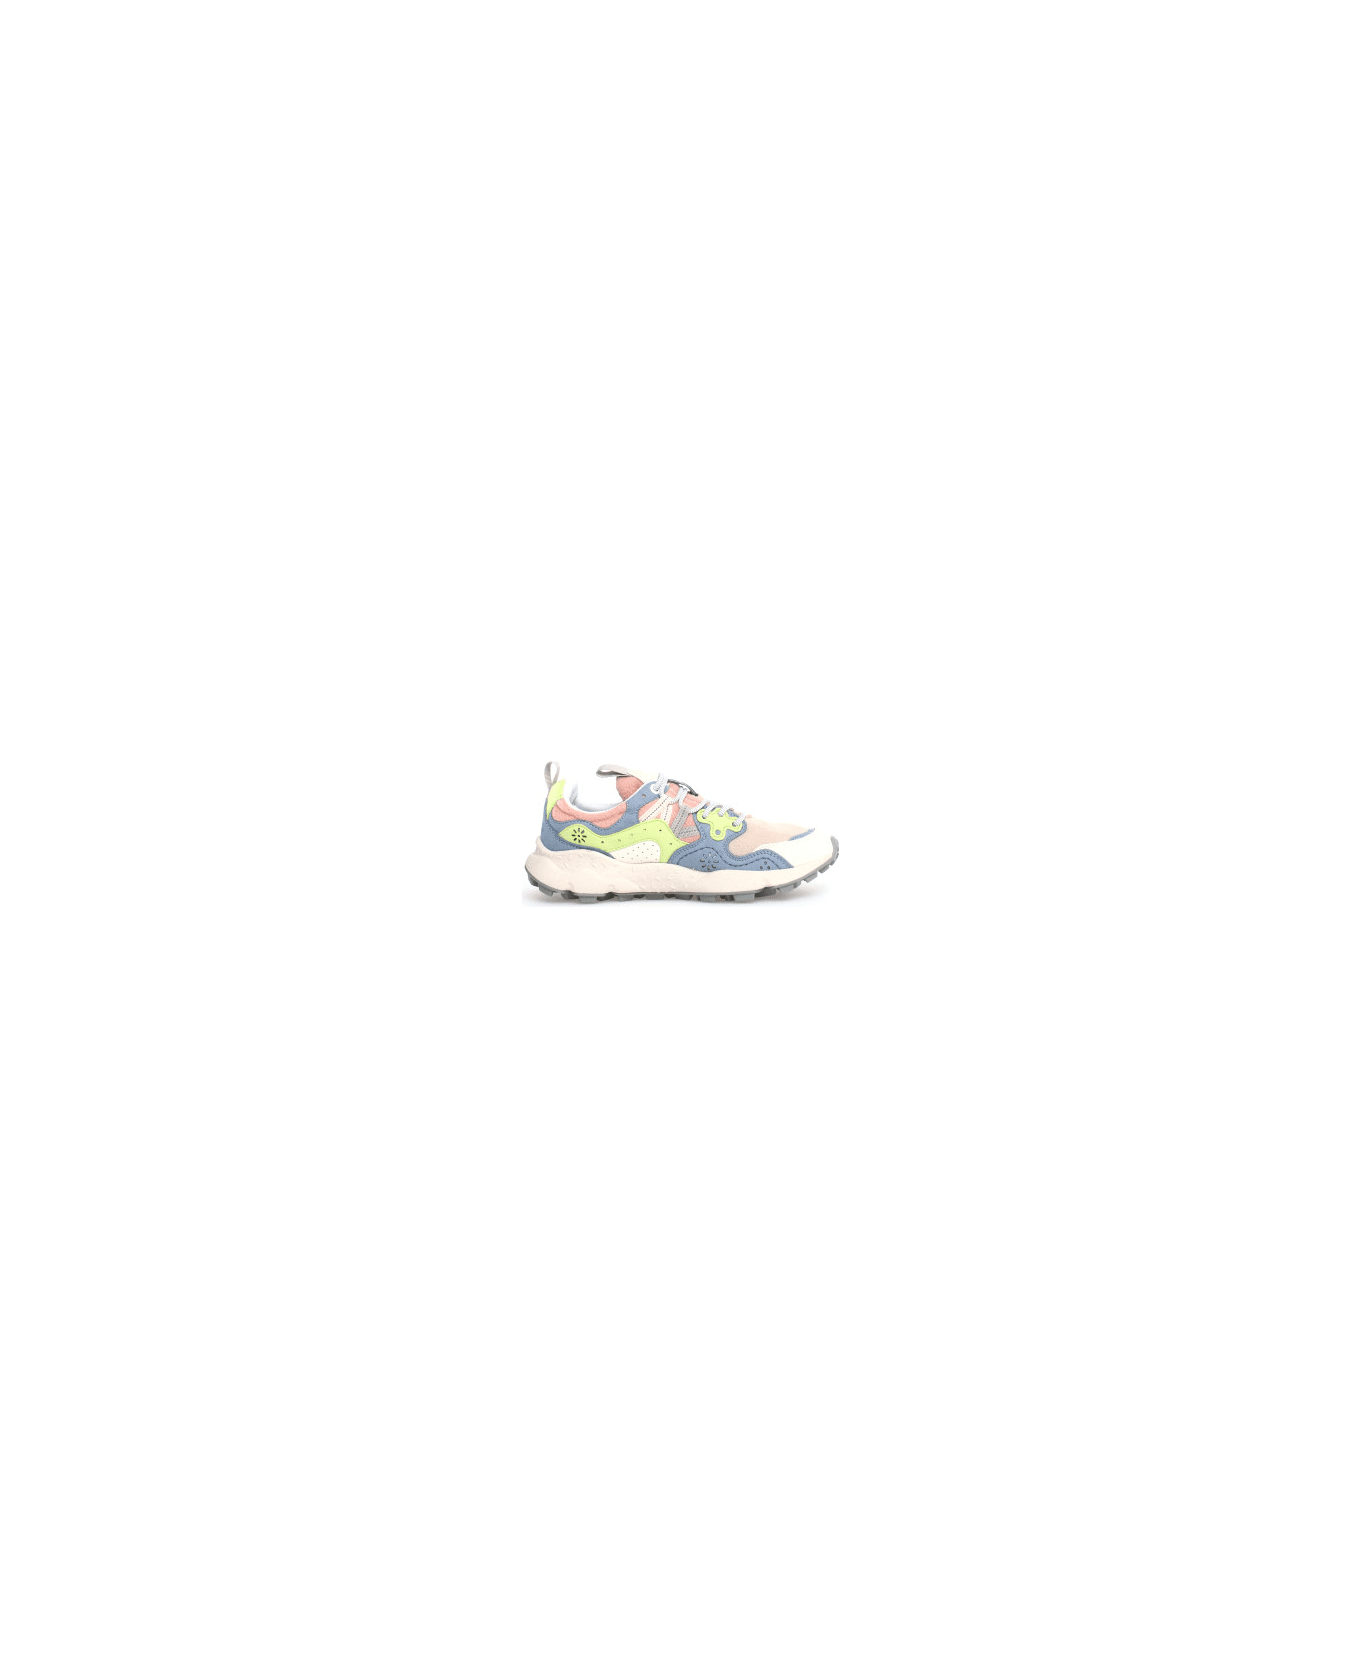 Flower Mountain Sneakers Yamano 3 - Multicolor スニーカー